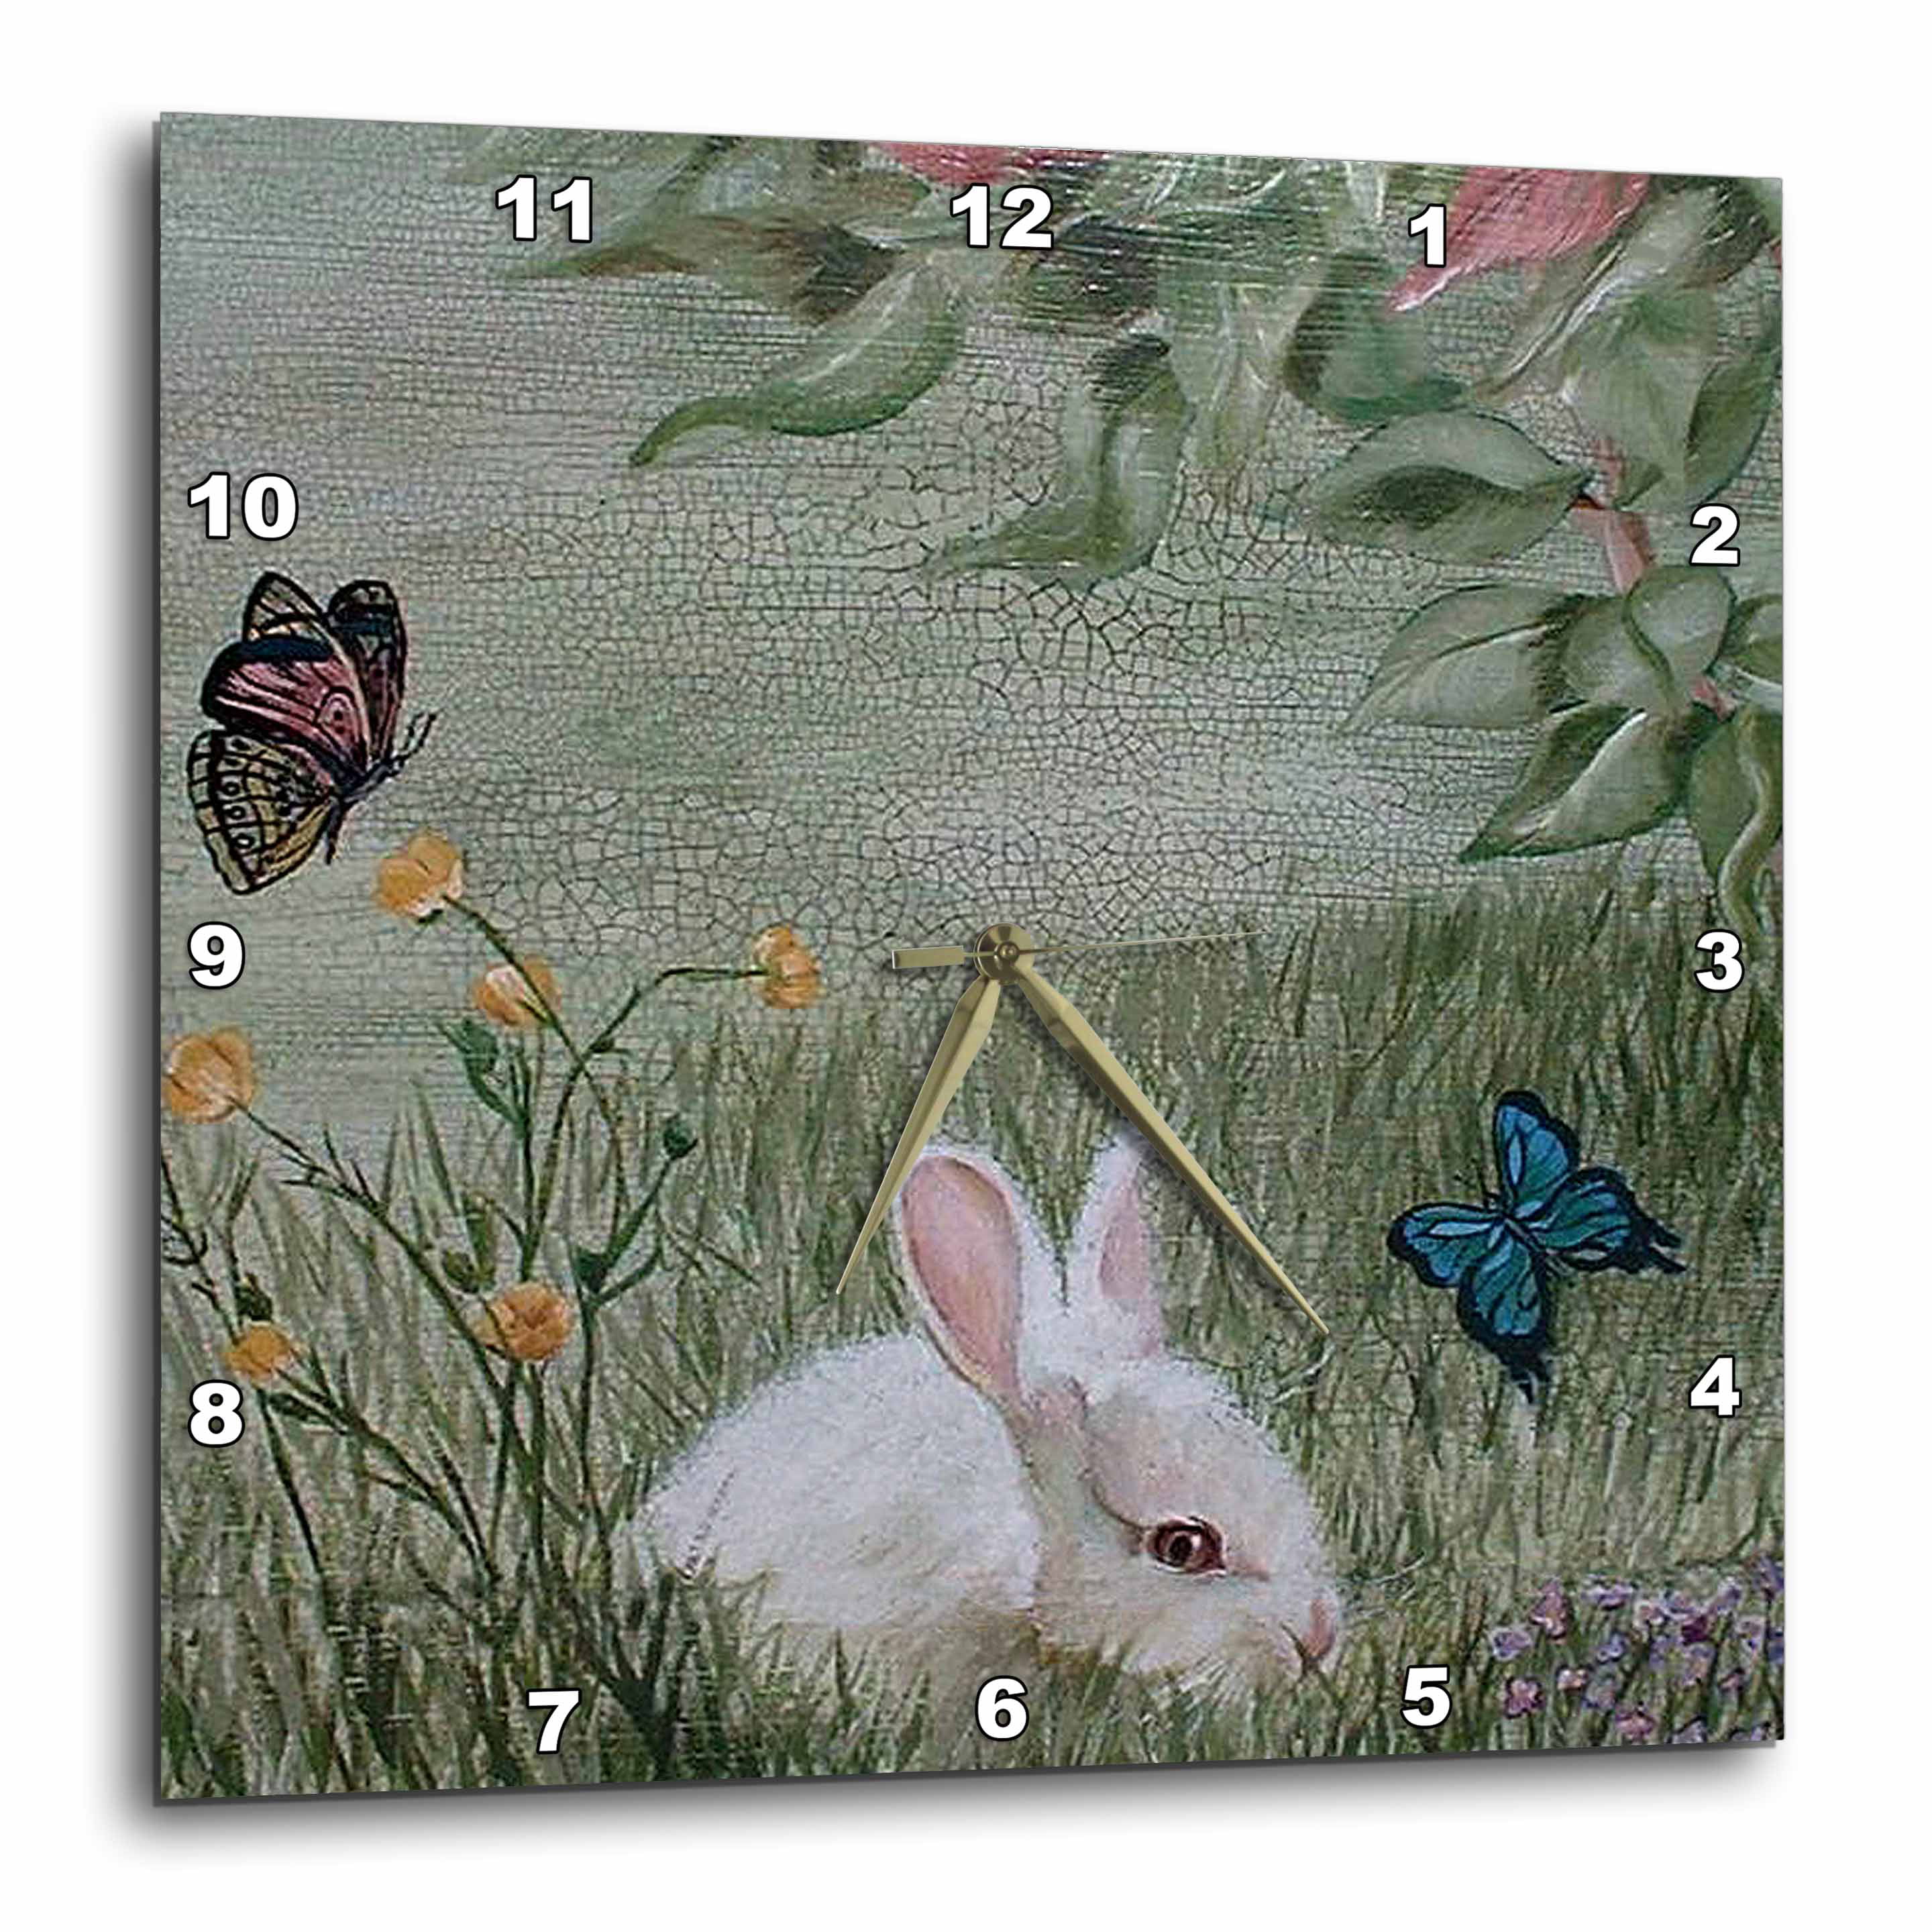 10 by 10-Inch 3dRose DPP_44347_1 Bunny Rabbit in Grass with Butterflies Flying Nearby Wall Clock